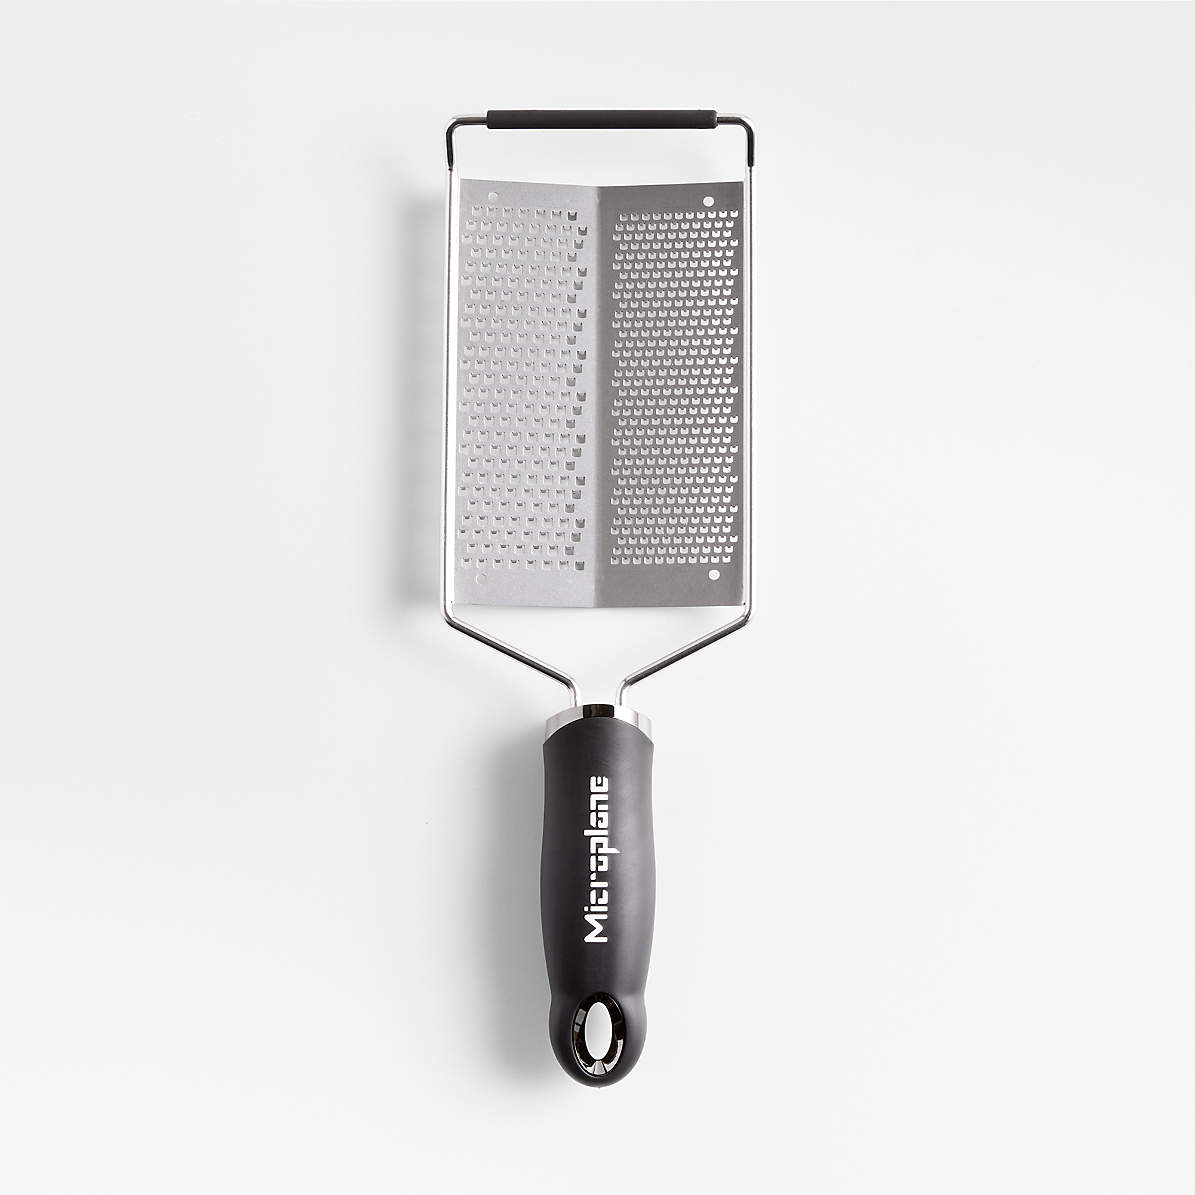 Microplane vs. Grater: Which One Should You Buy?